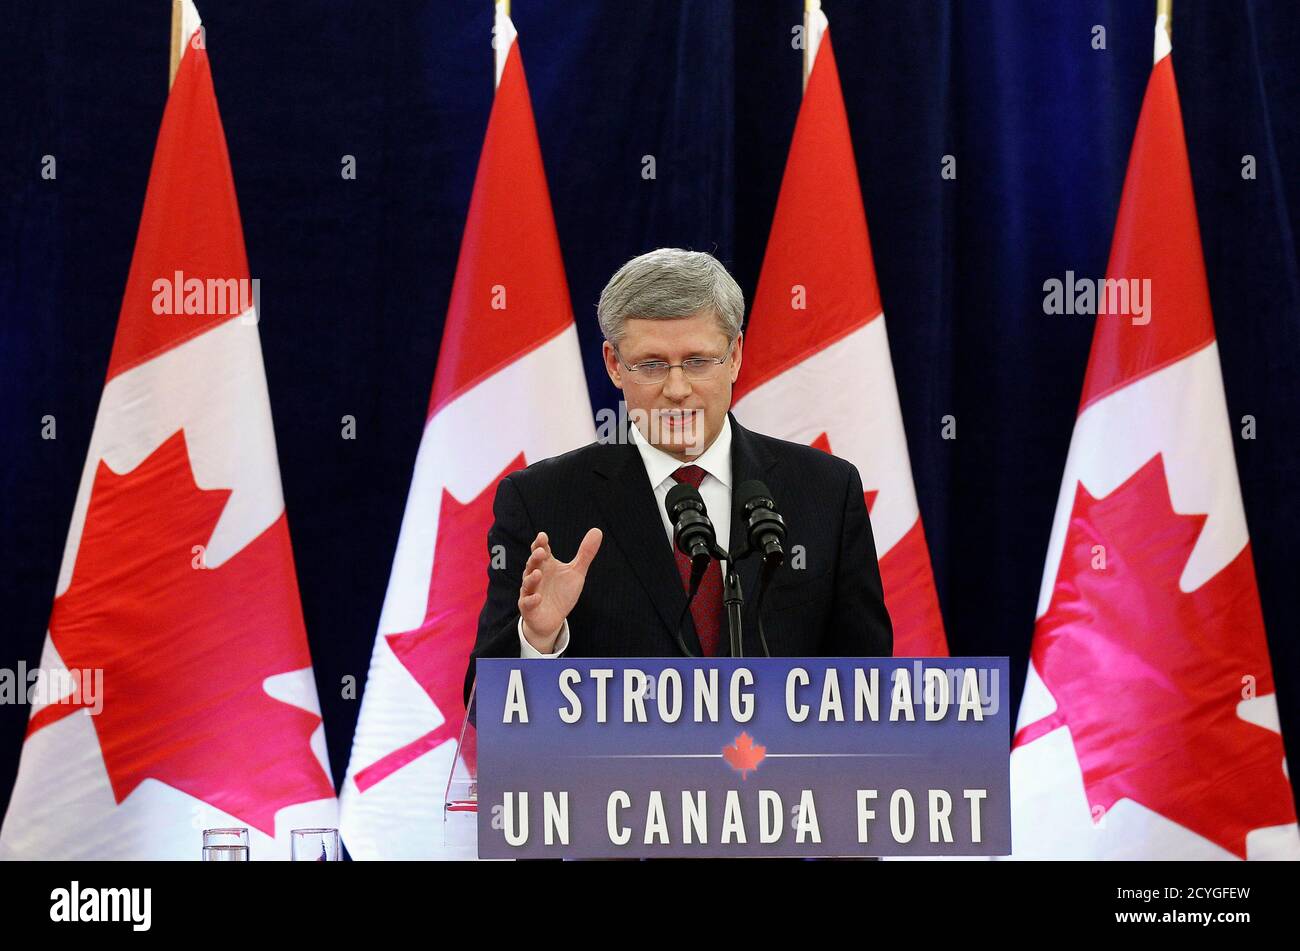 Canada's Prime Minister Stephen Harper speaks during a news conference on Parliament Hill in Ottawa December 7, 2012. Harper voiced confidence on Friday that Canada would still attract the investment it needs despite new curbs he has imposed on state-owned enterprises seeking to acquire majority stakes in oil sands businesses. REUTERS/Chris Wattie (CANADA - Tags: POLITICS BUSINESS) Stock Photo